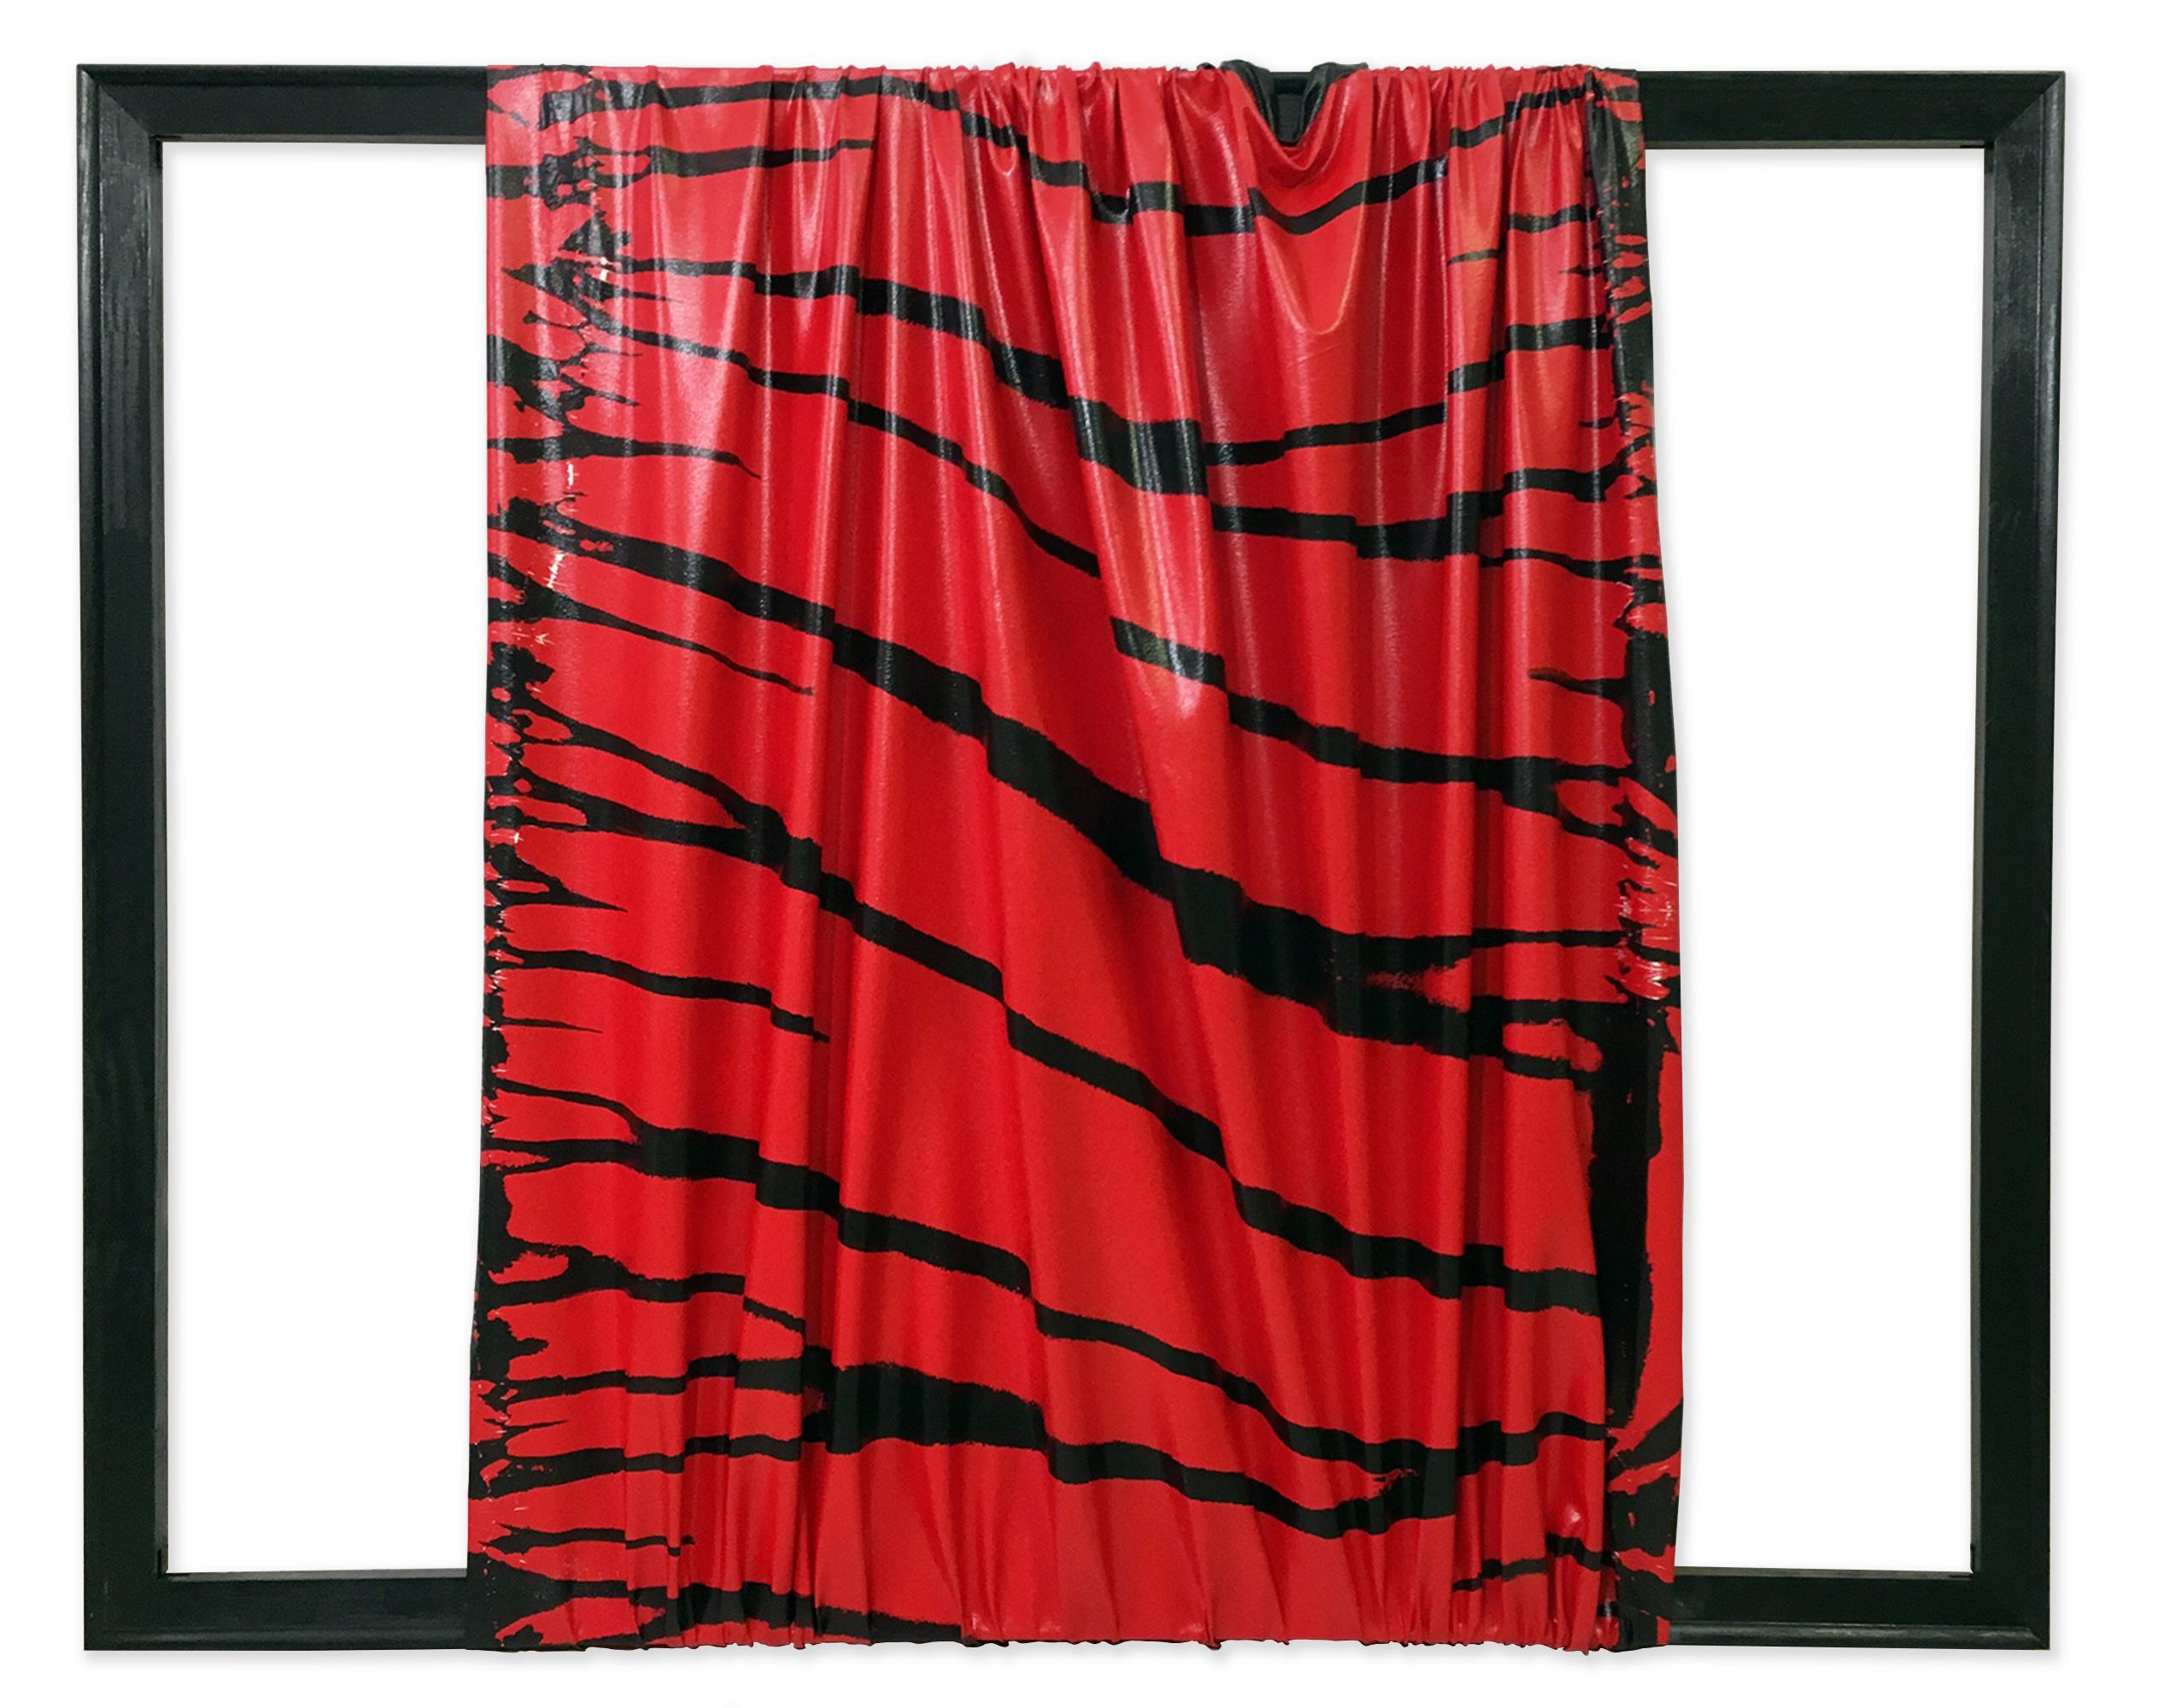 Red and black experimental abstract sculptural painting. The work was intentionally removed from the stretchers to make a wave effect to the surface. The piece is signed, titled, and dated by artist Chris Bexar who is a Houston, Texas artist. The